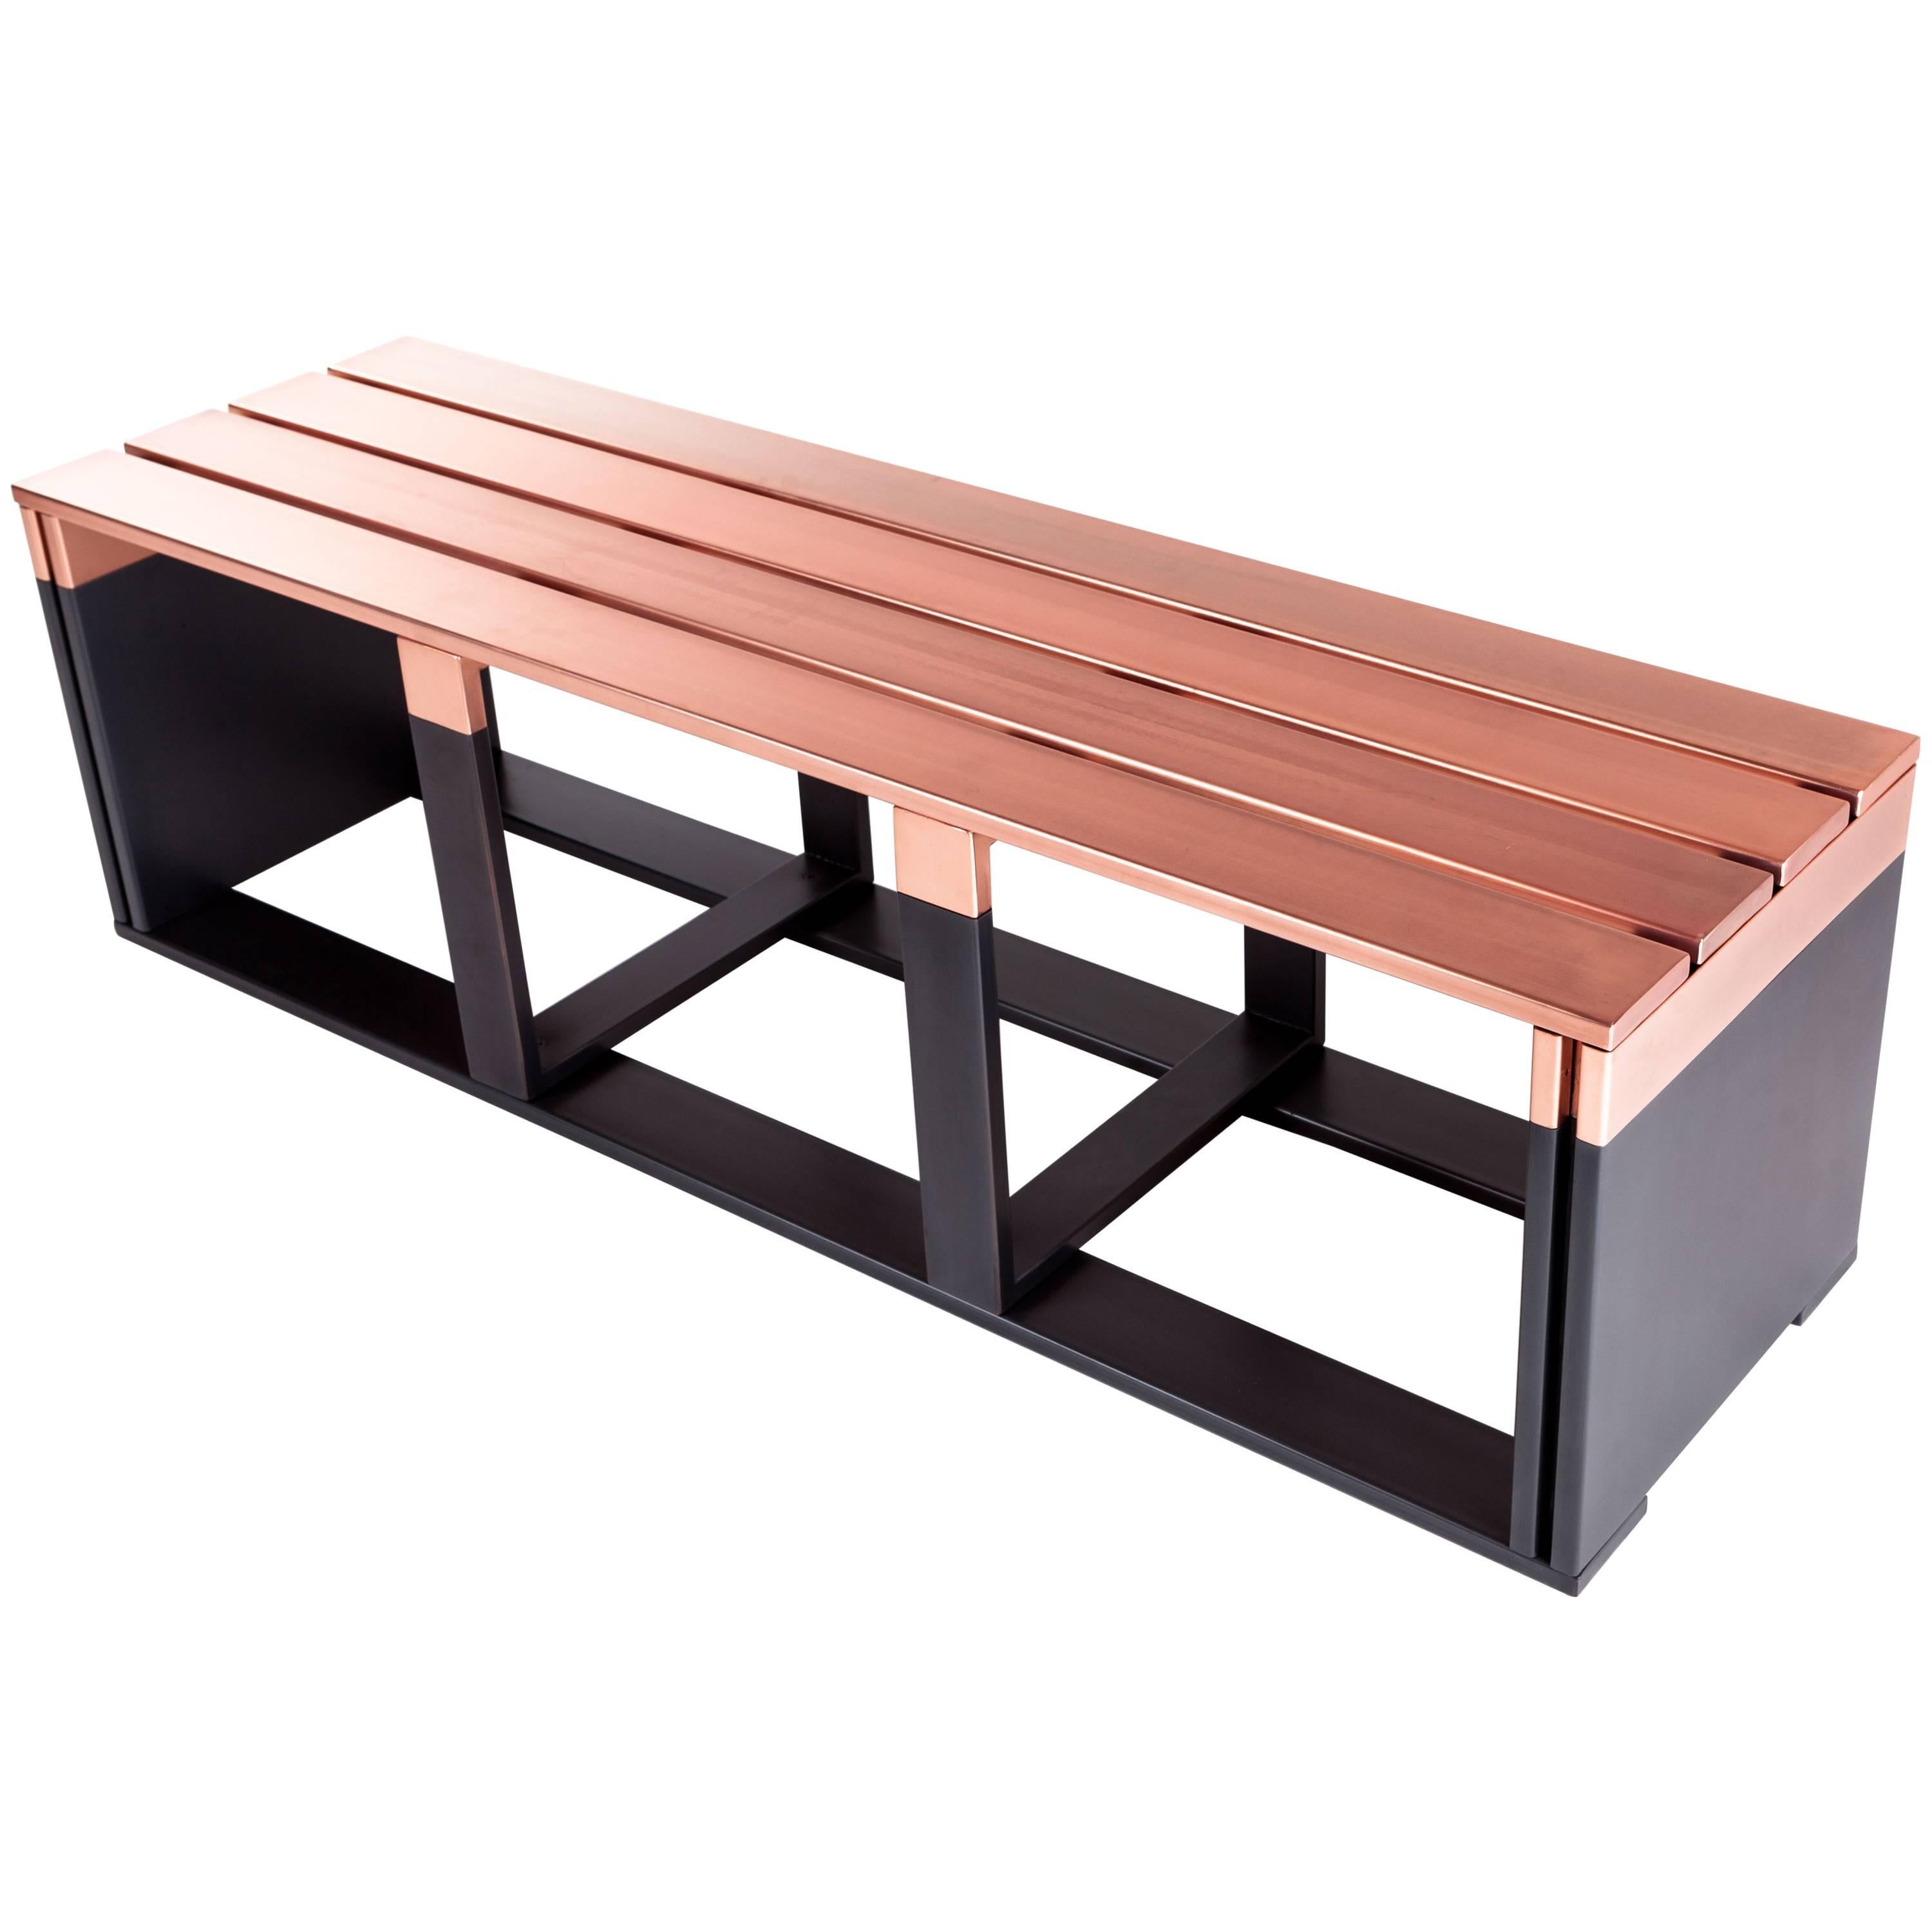 Bicroma Bench in Copper and Dark Matt Iron by Parisotto and Formenton For Sale